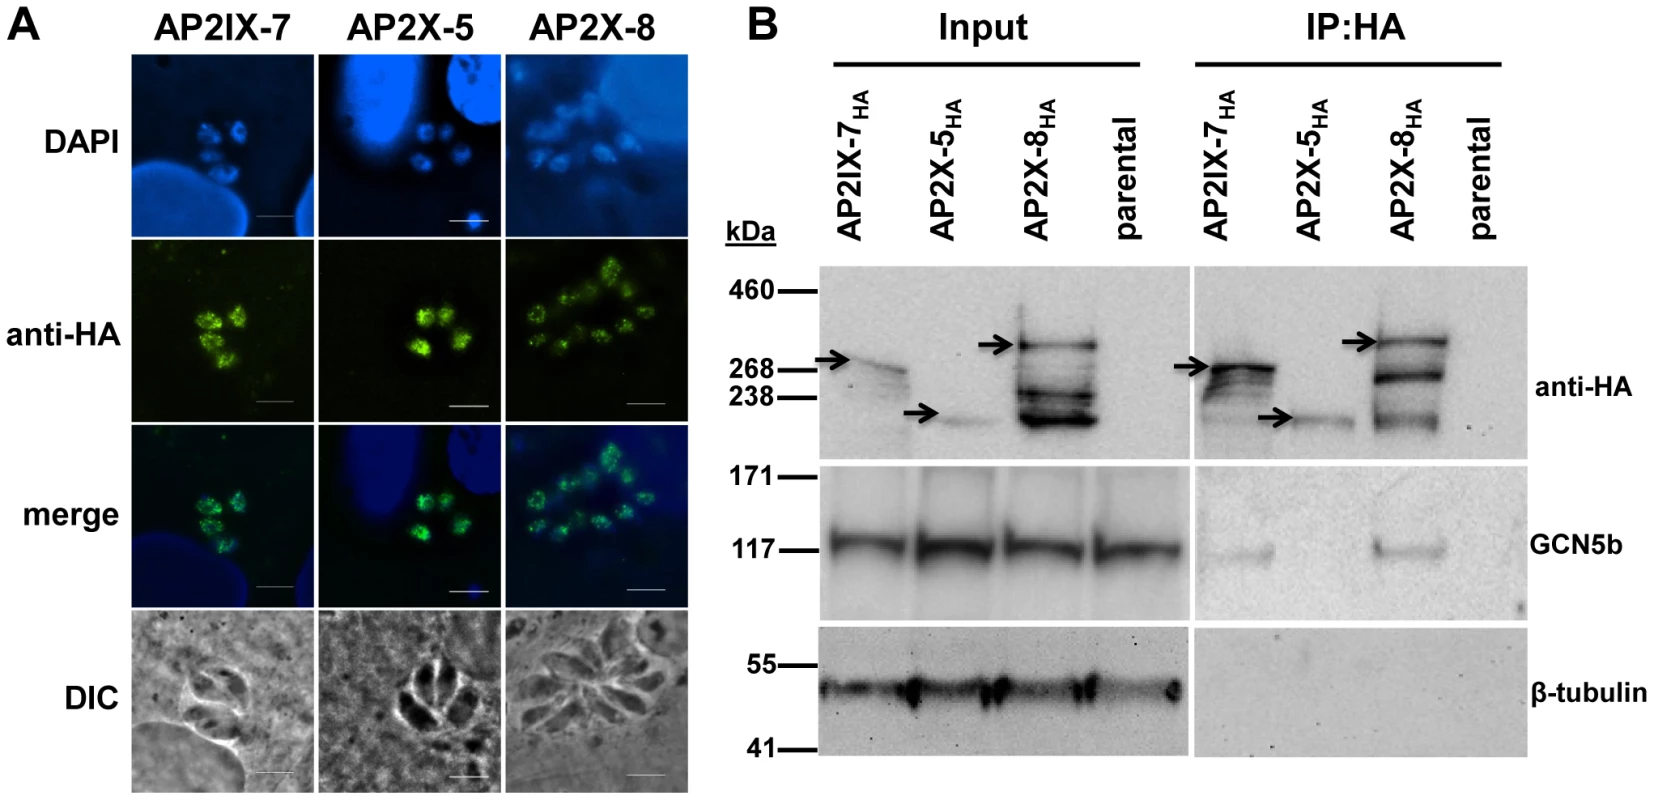 Reciprocal immunoprecipitation confirms the <i>in vivo</i> interaction of GCN5b with endogenously HA-tagged AP2IX-7 and AP2X-8.